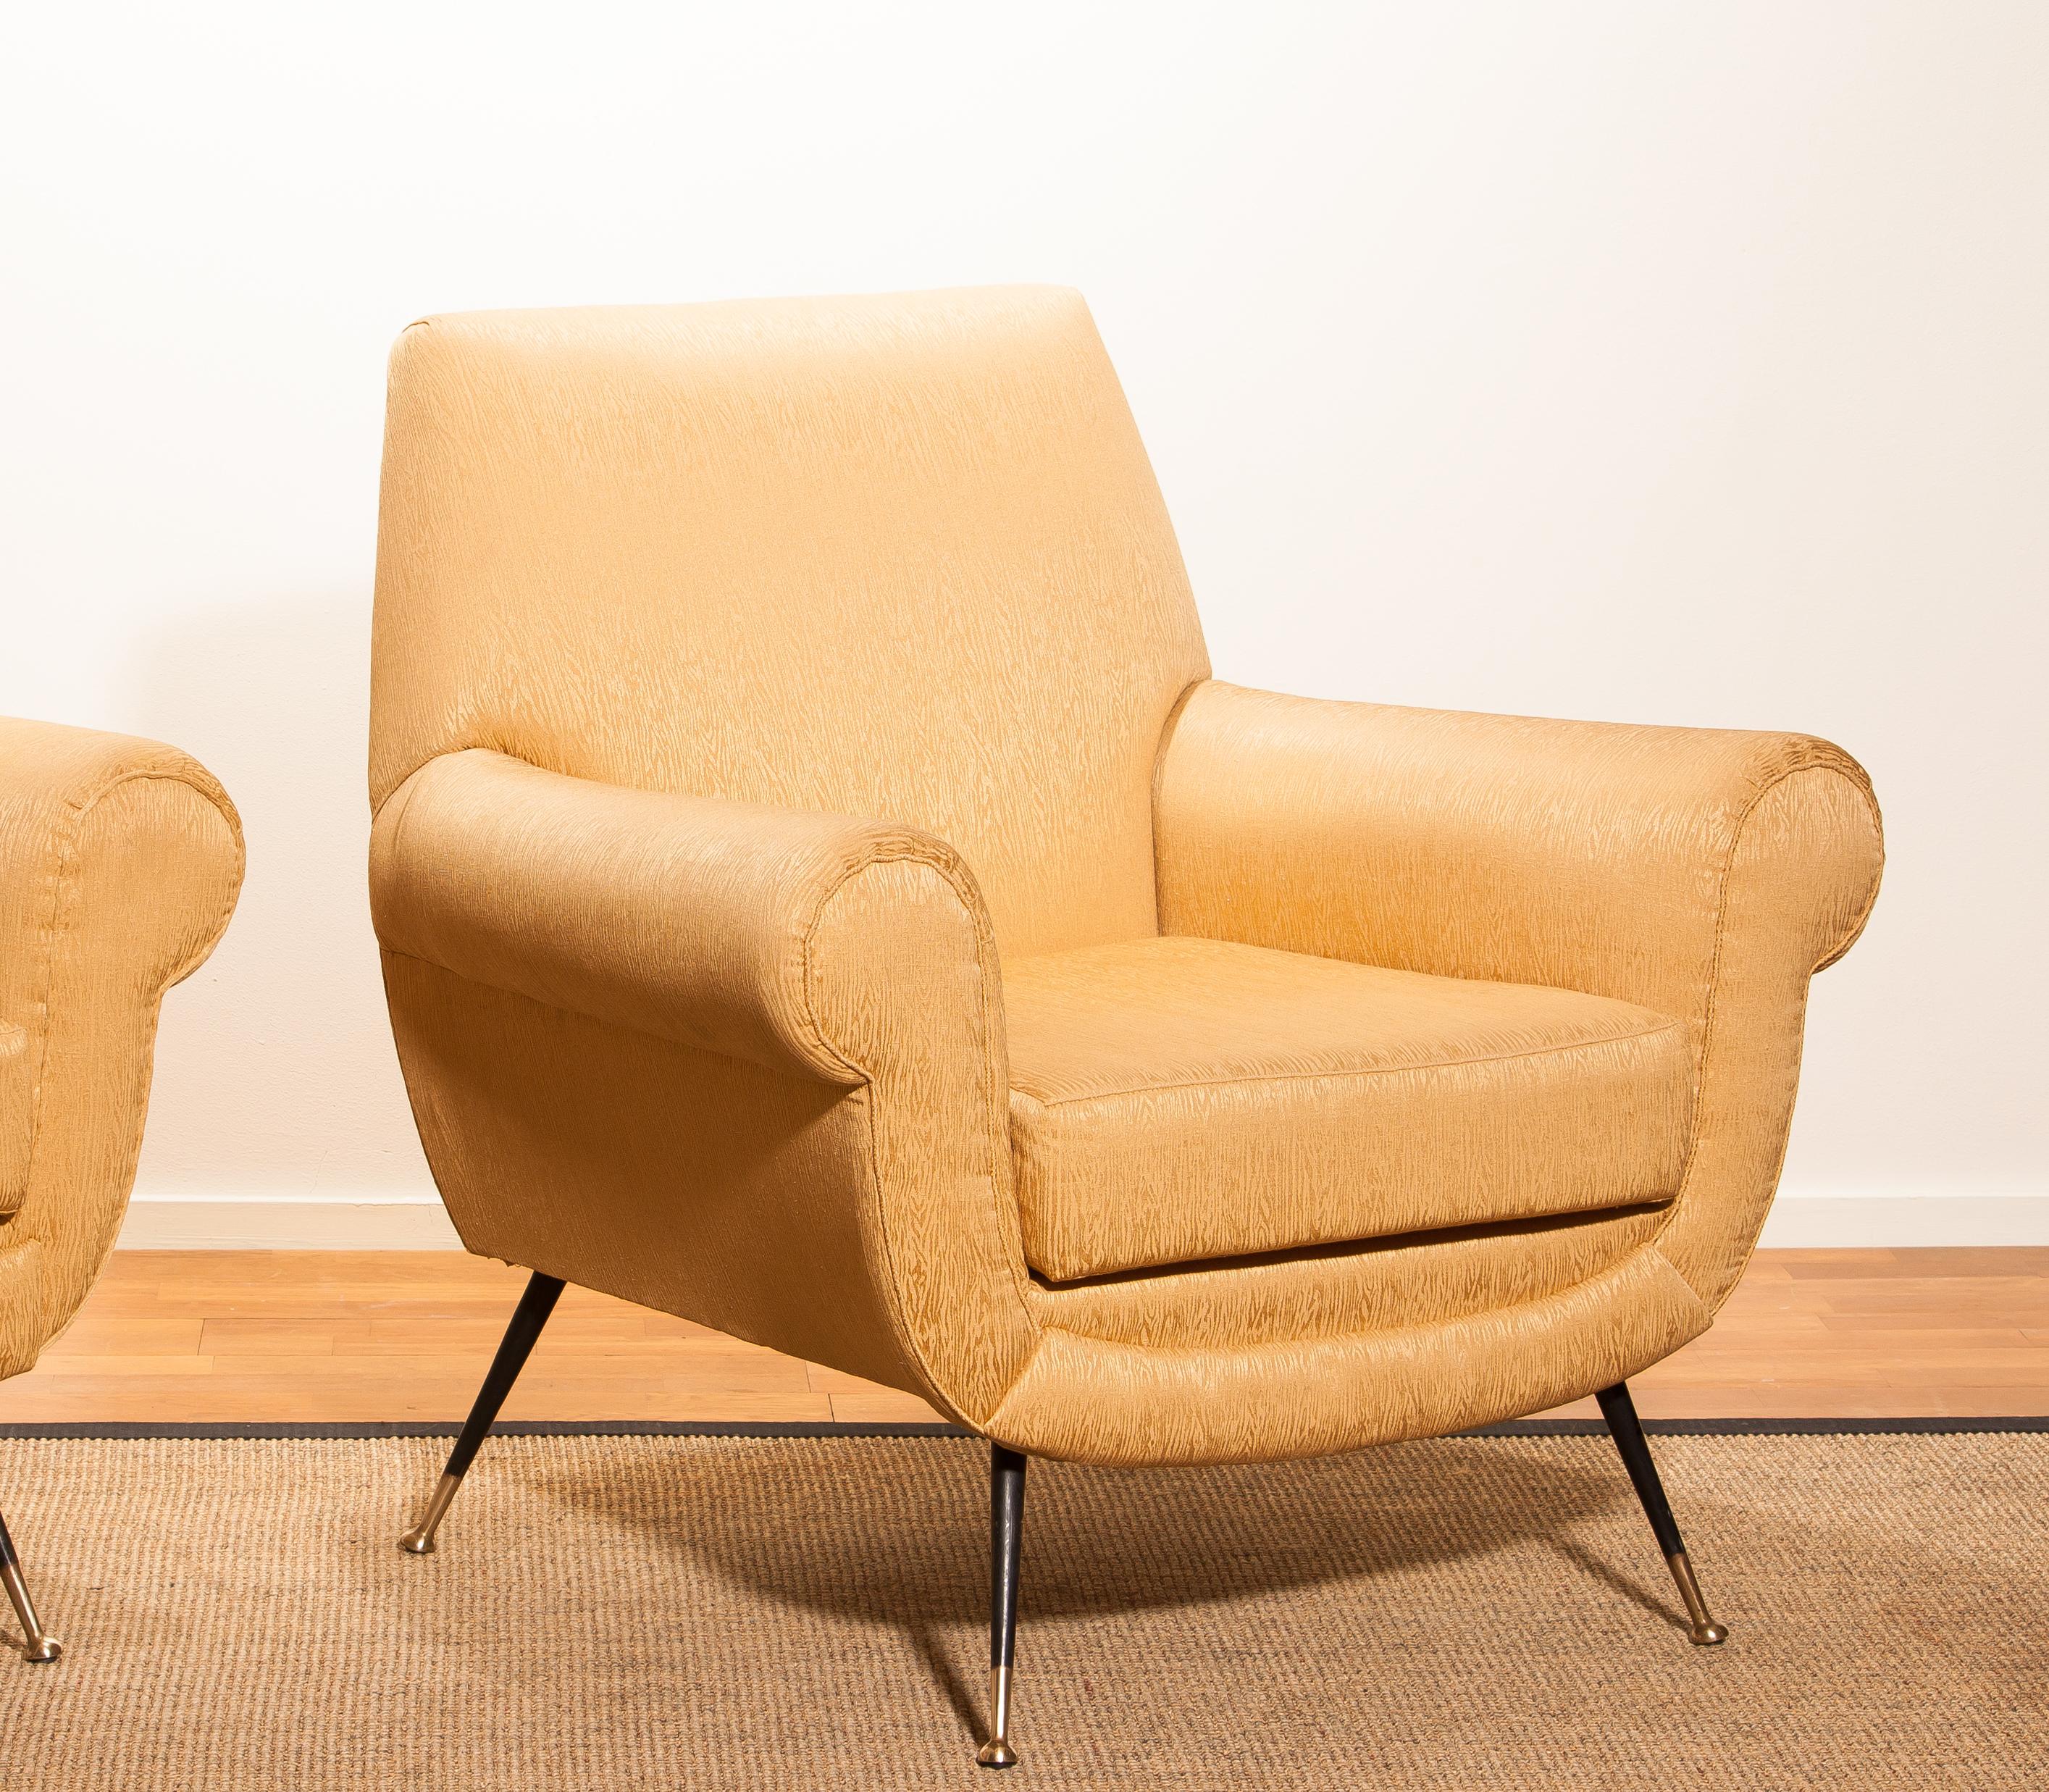 1950s, Brass and Golden Jacquard Set Lounge Chairs by Gigi Radice for Minotti 11